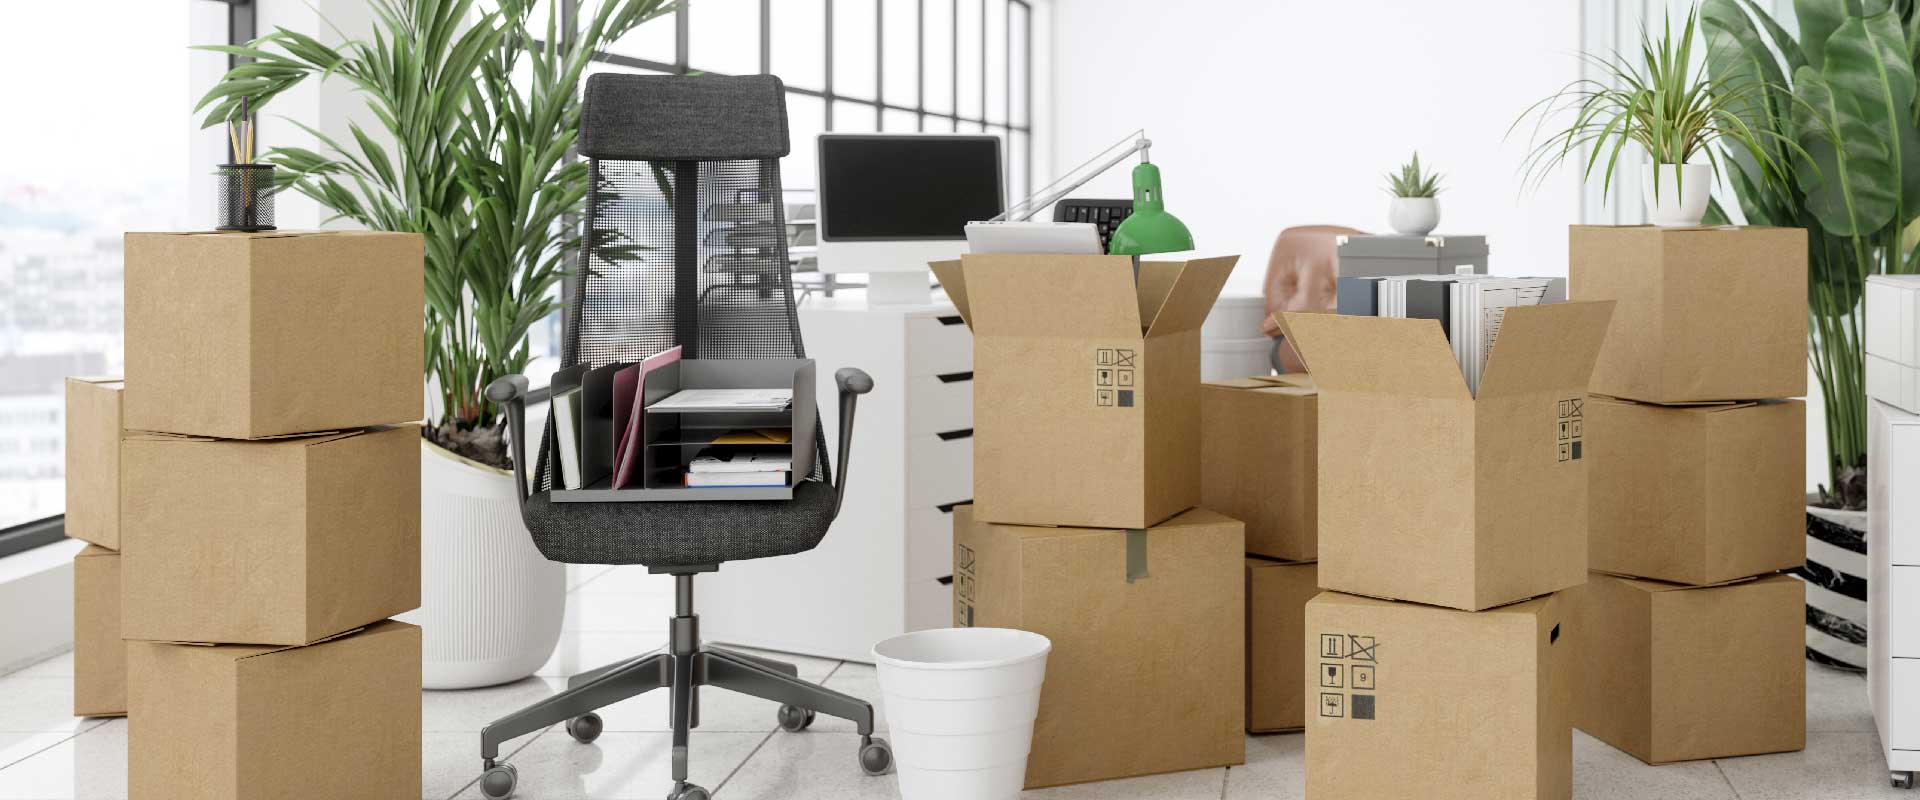 How-To-Prepare-For-an-Office-Move